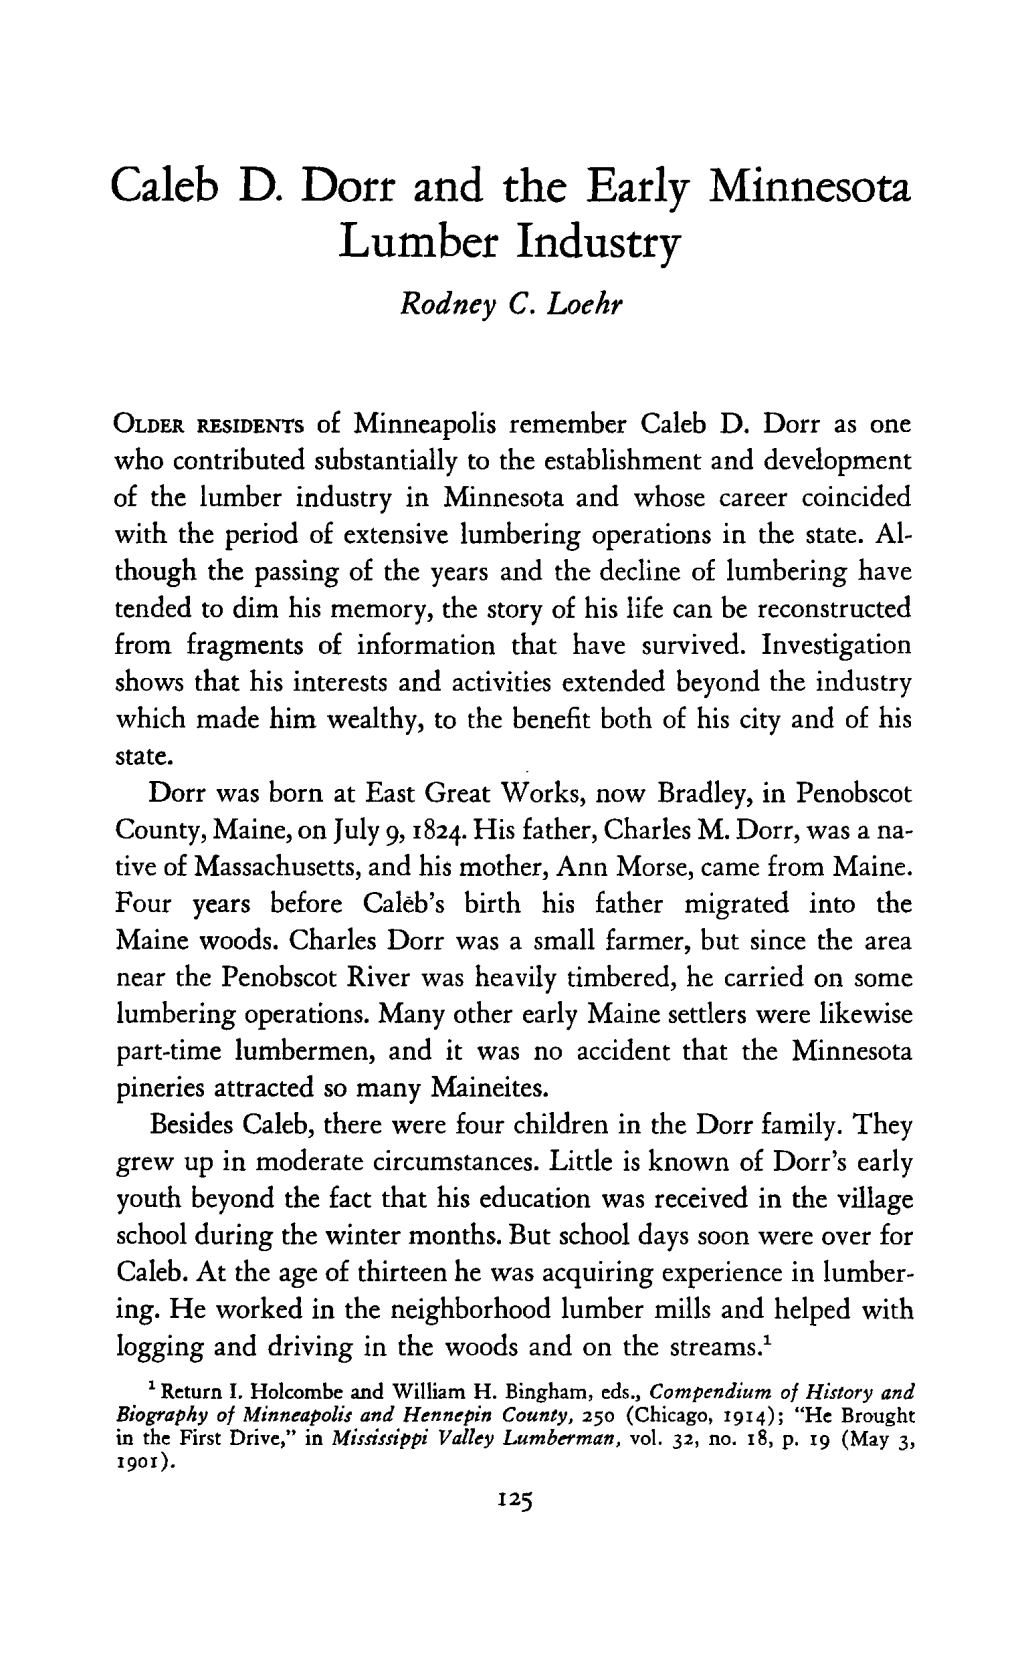 Caleb D. Dorr and the Early Minnesota Lumber Industry Rodney C